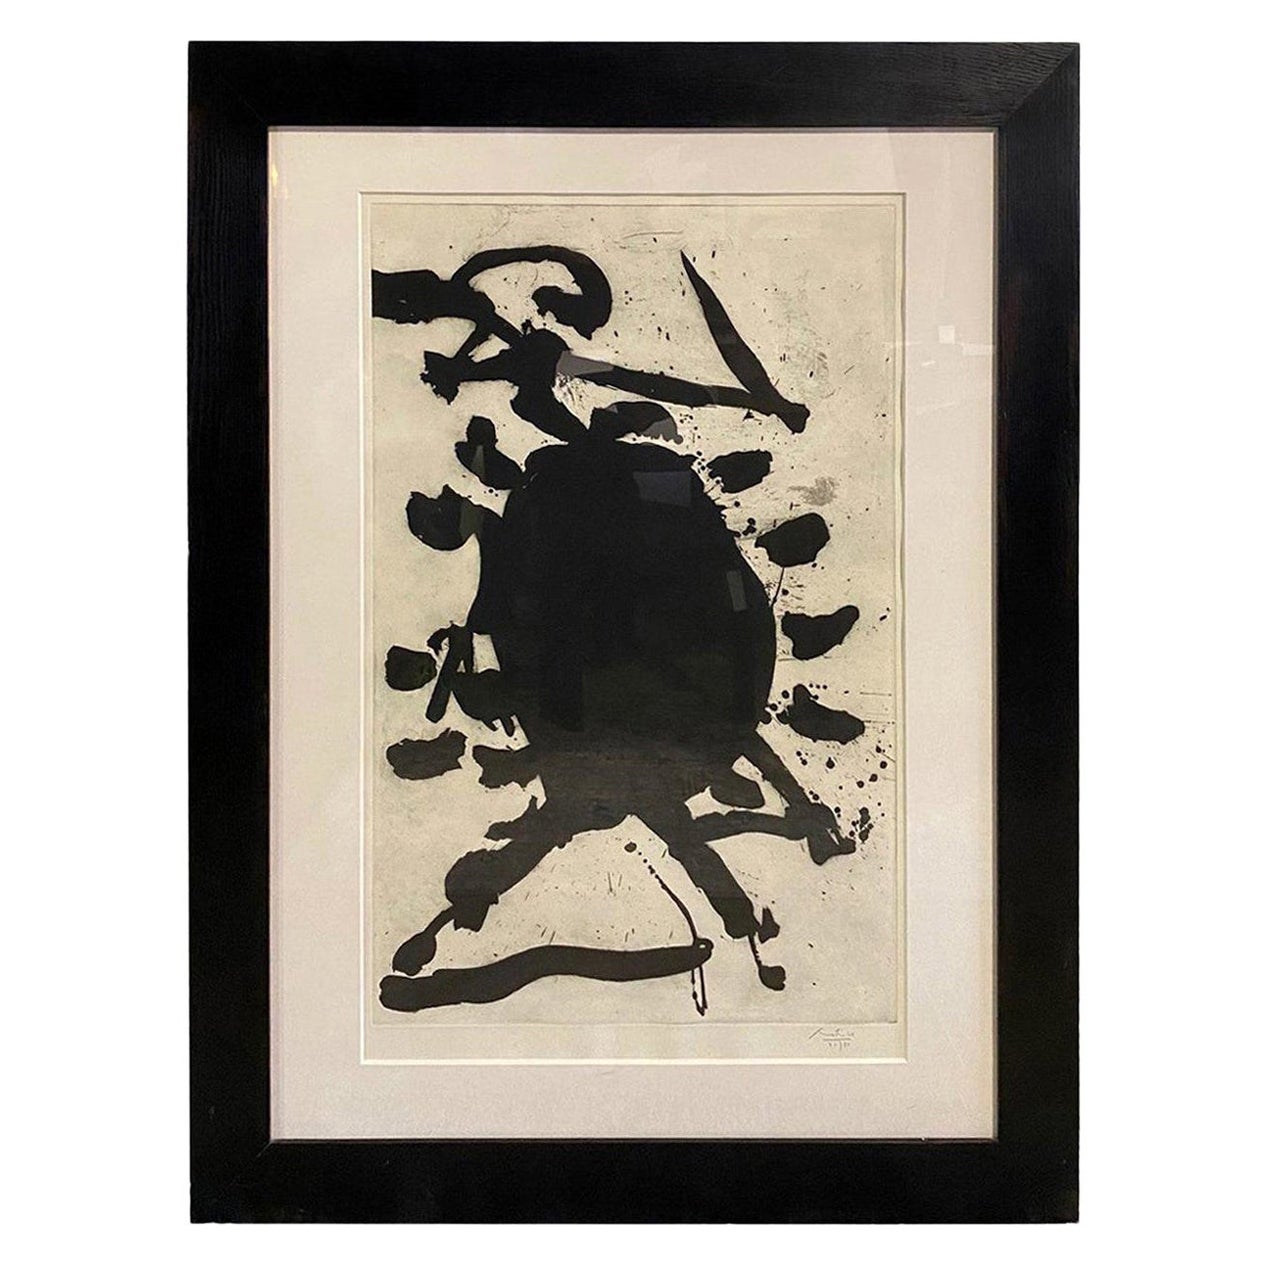 Robert Motherwell Signed Limited Edition Large Aquatint Etching Blackened Sun For Sale